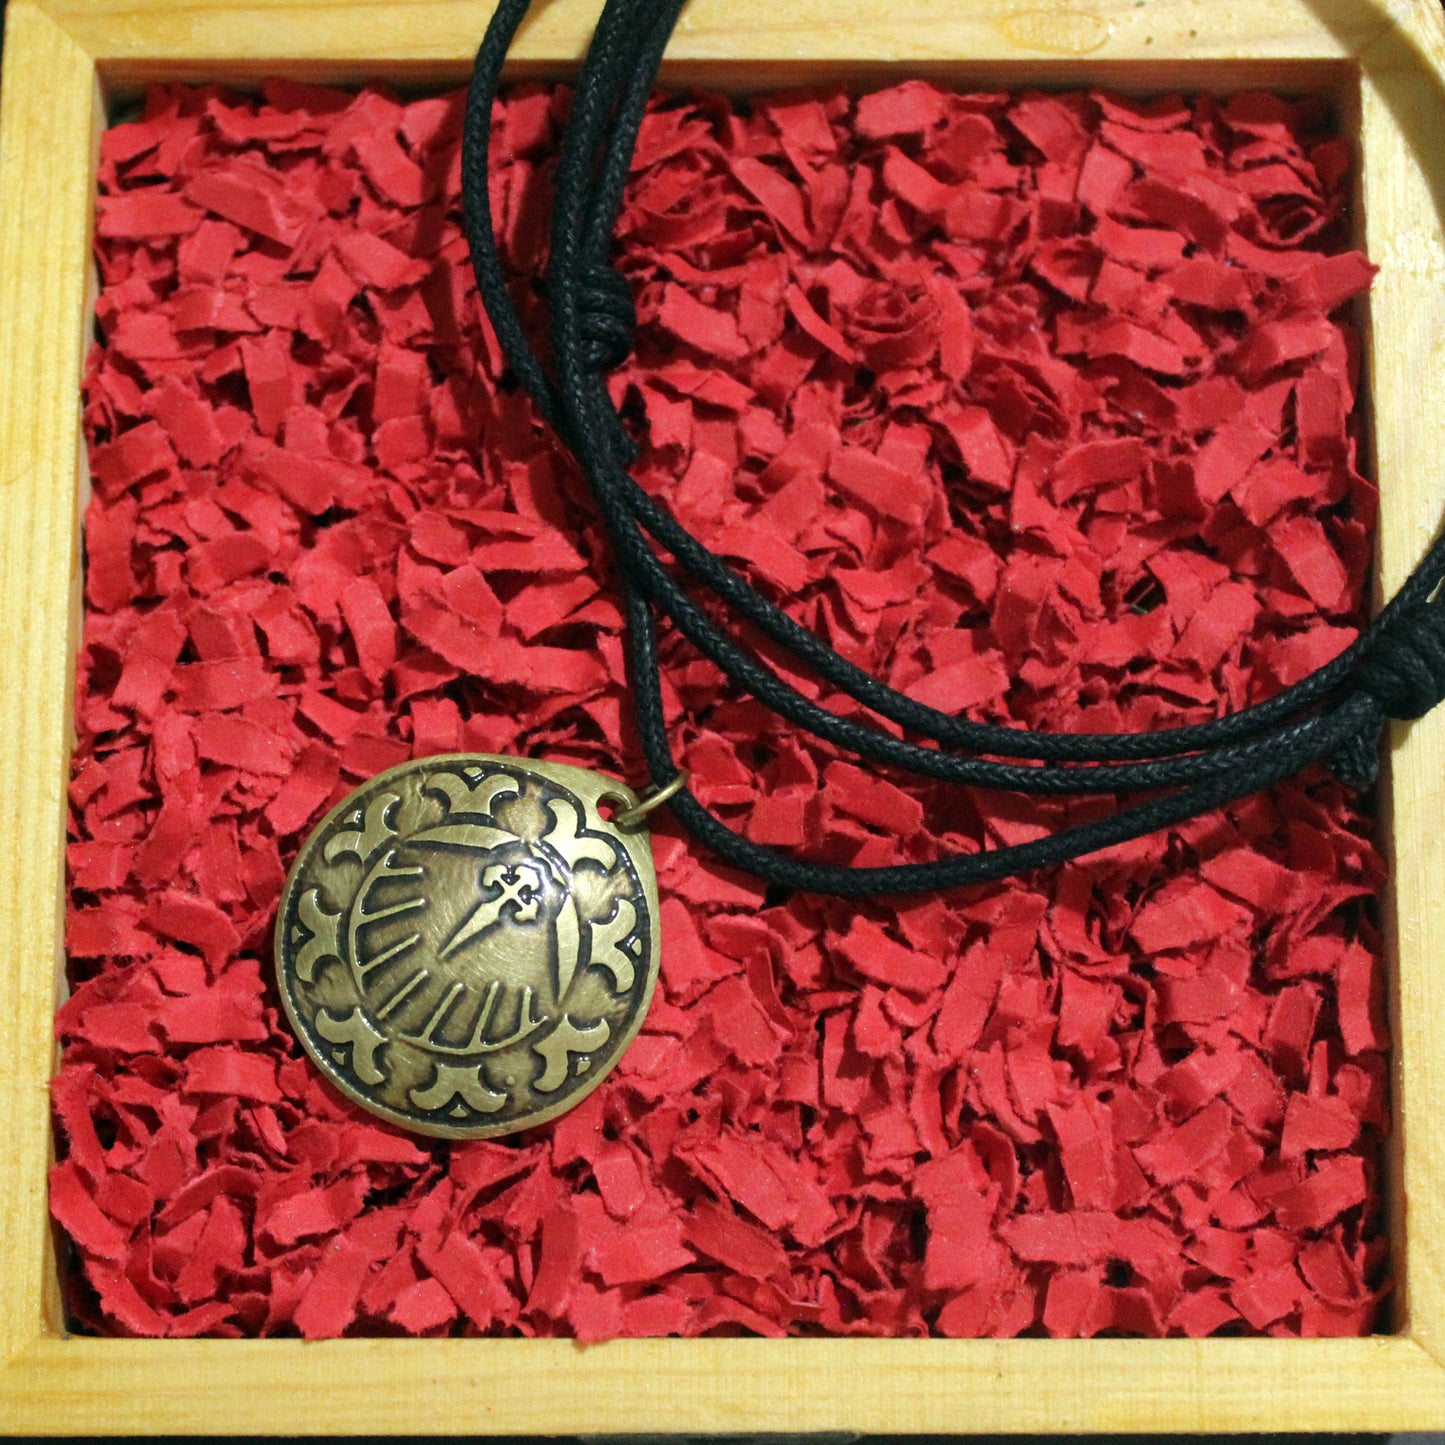 Convex Brass Pendant with Shell and Engraved Cross for the Camino de Santiago